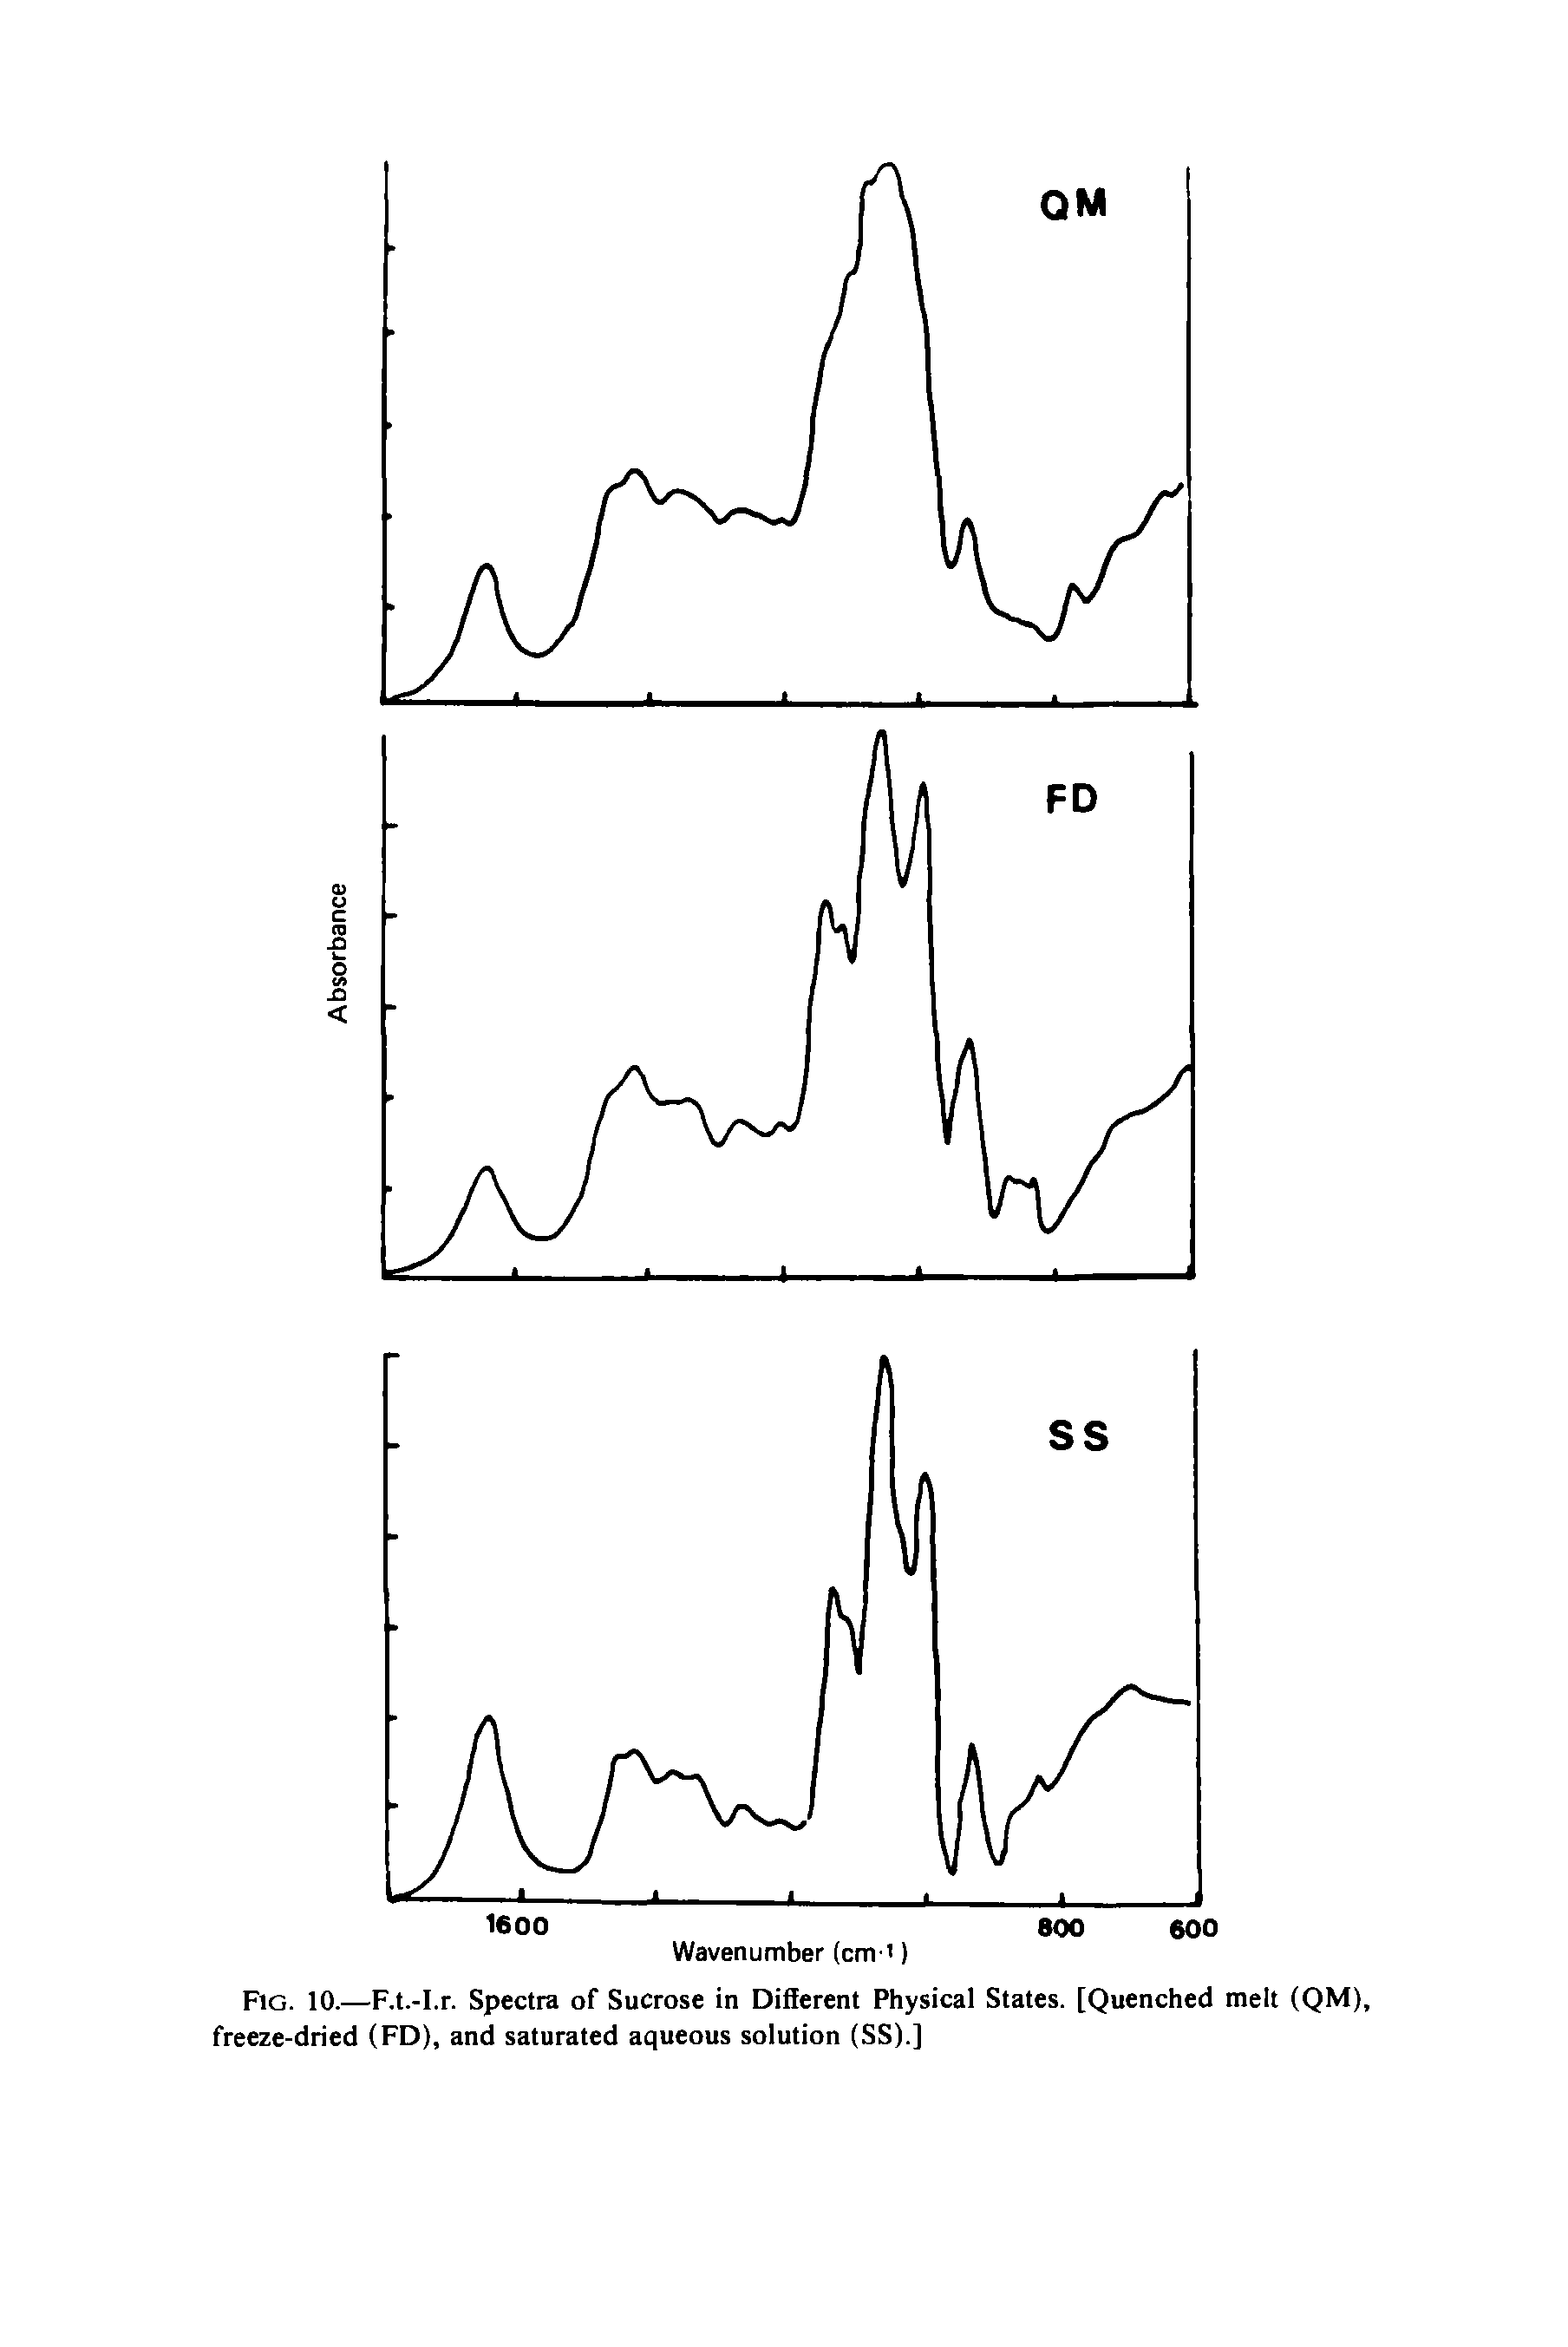 Fig. 10.—F.t.-I.r. Spectra of Sucrose in Different Physical States. [Quenched melt (QM), freeze-dried (FD), and saturated aqueous solution (SS).]...